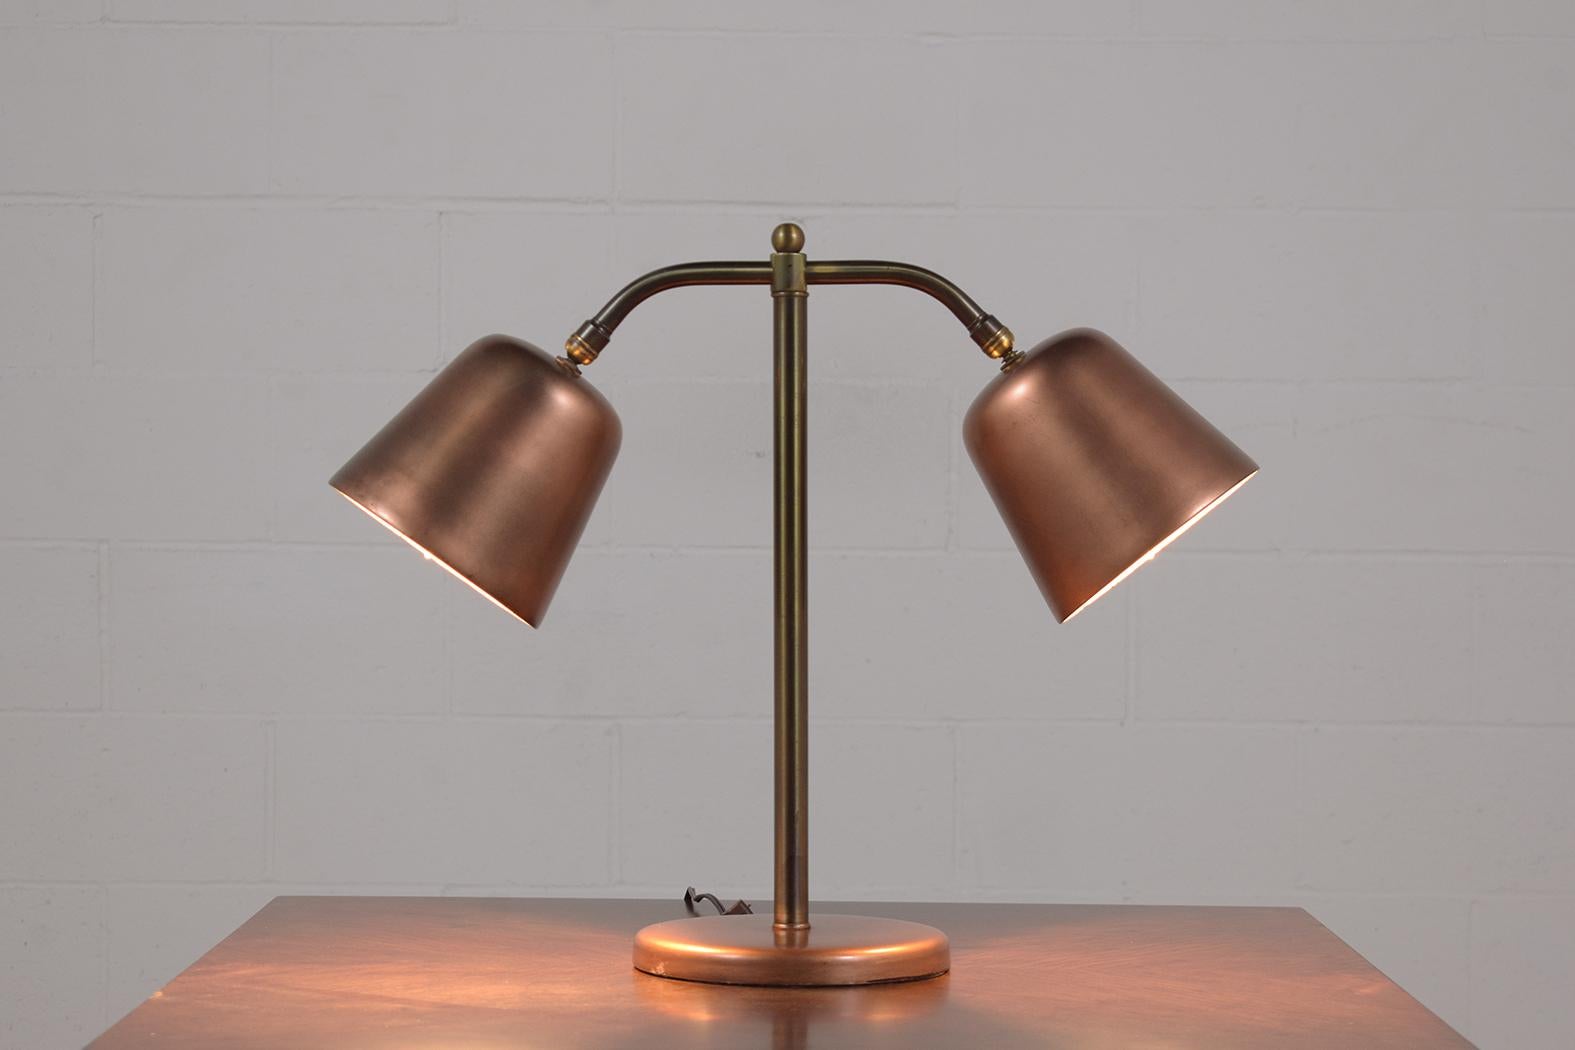 This extraordinary Mid-Century Modern table lamp is in great condition is hand-crafted out of brass and has been newly restored and wired by our professional craftsman team in the house. This vintage table lamp is eye-catching and features a unique